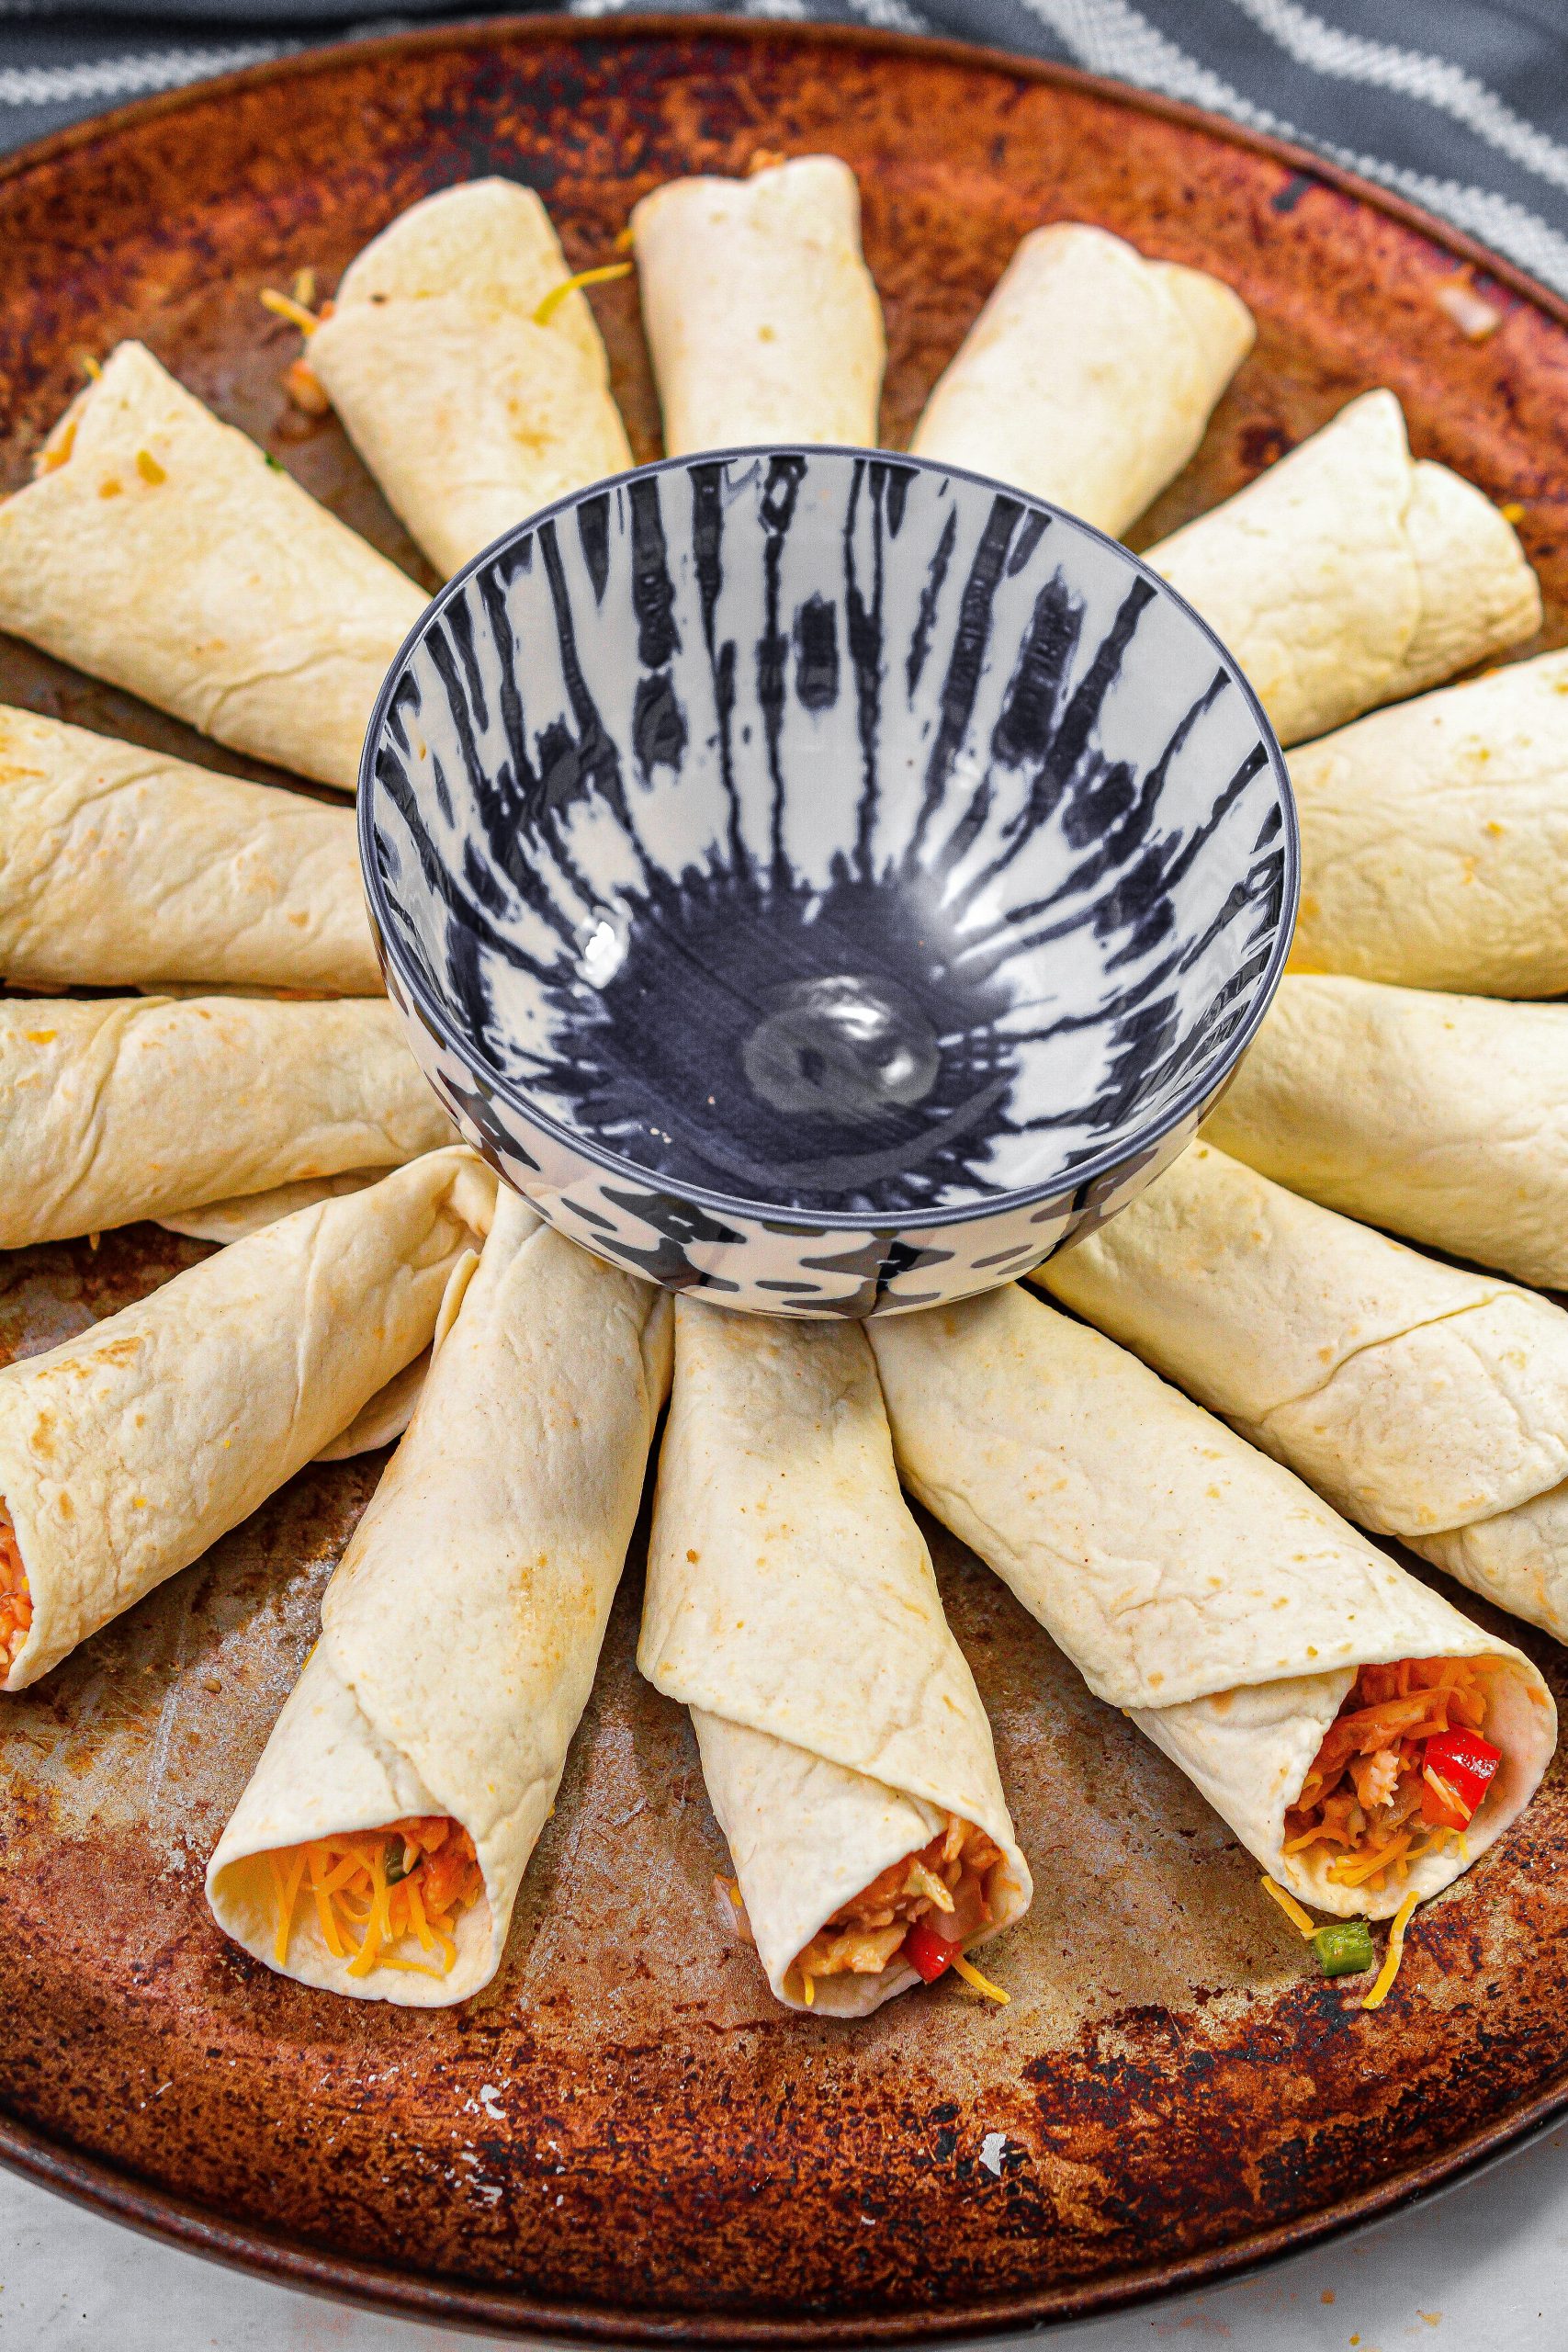 Place a bowl in the center of a round baking sheet, and layer the quesadilla cones in a circle around the bowl.